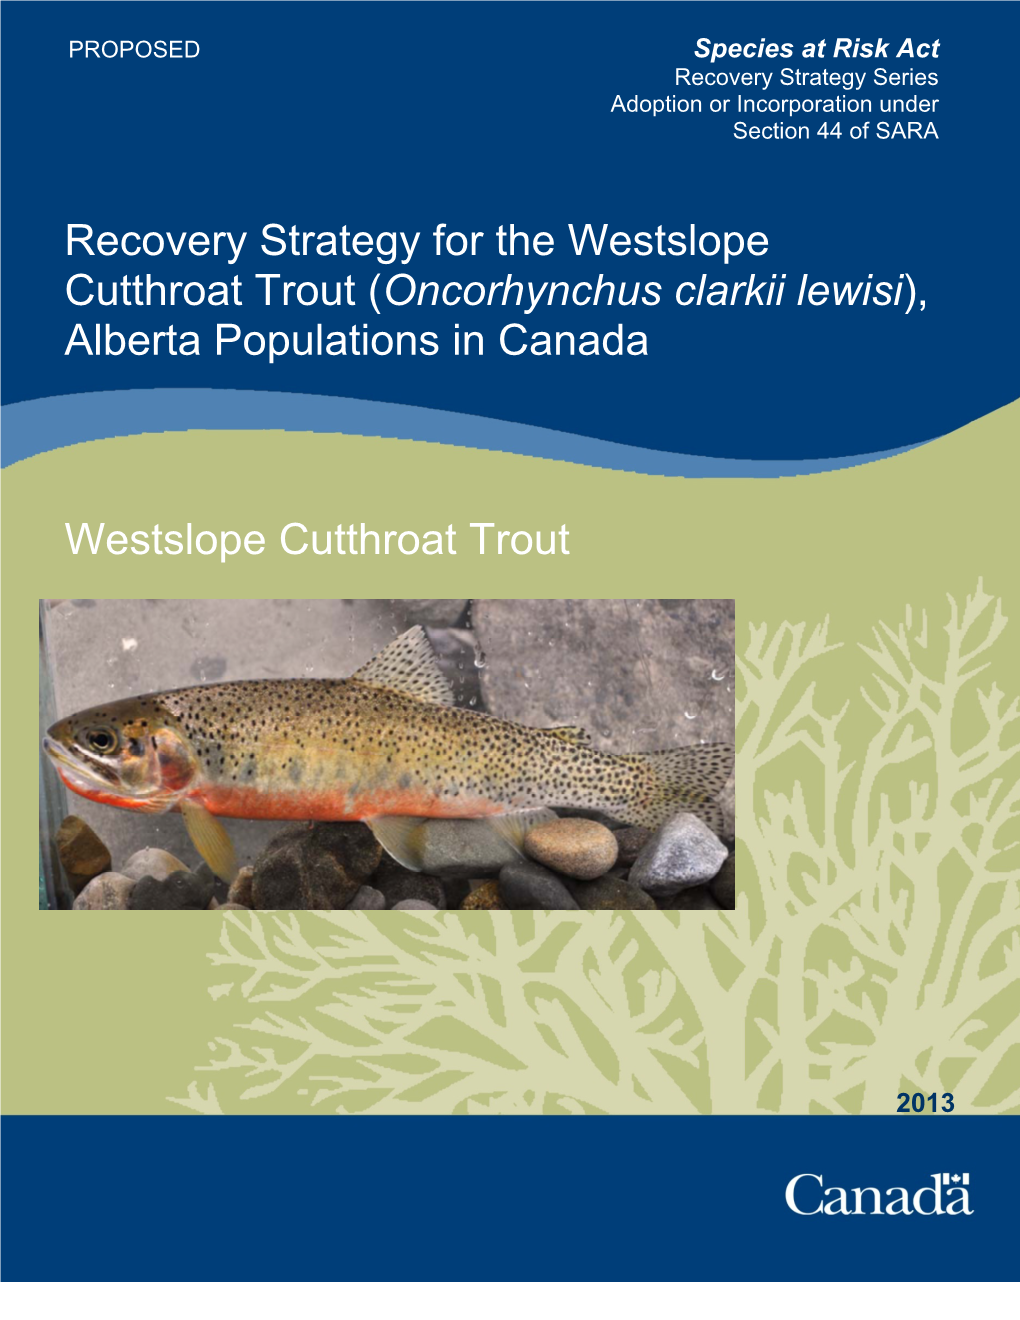 Recovery Strategy for the Westslope Cutthroat Trout (Oncorhynchus Clarkii Lewisi), Alberta Populations in Canada